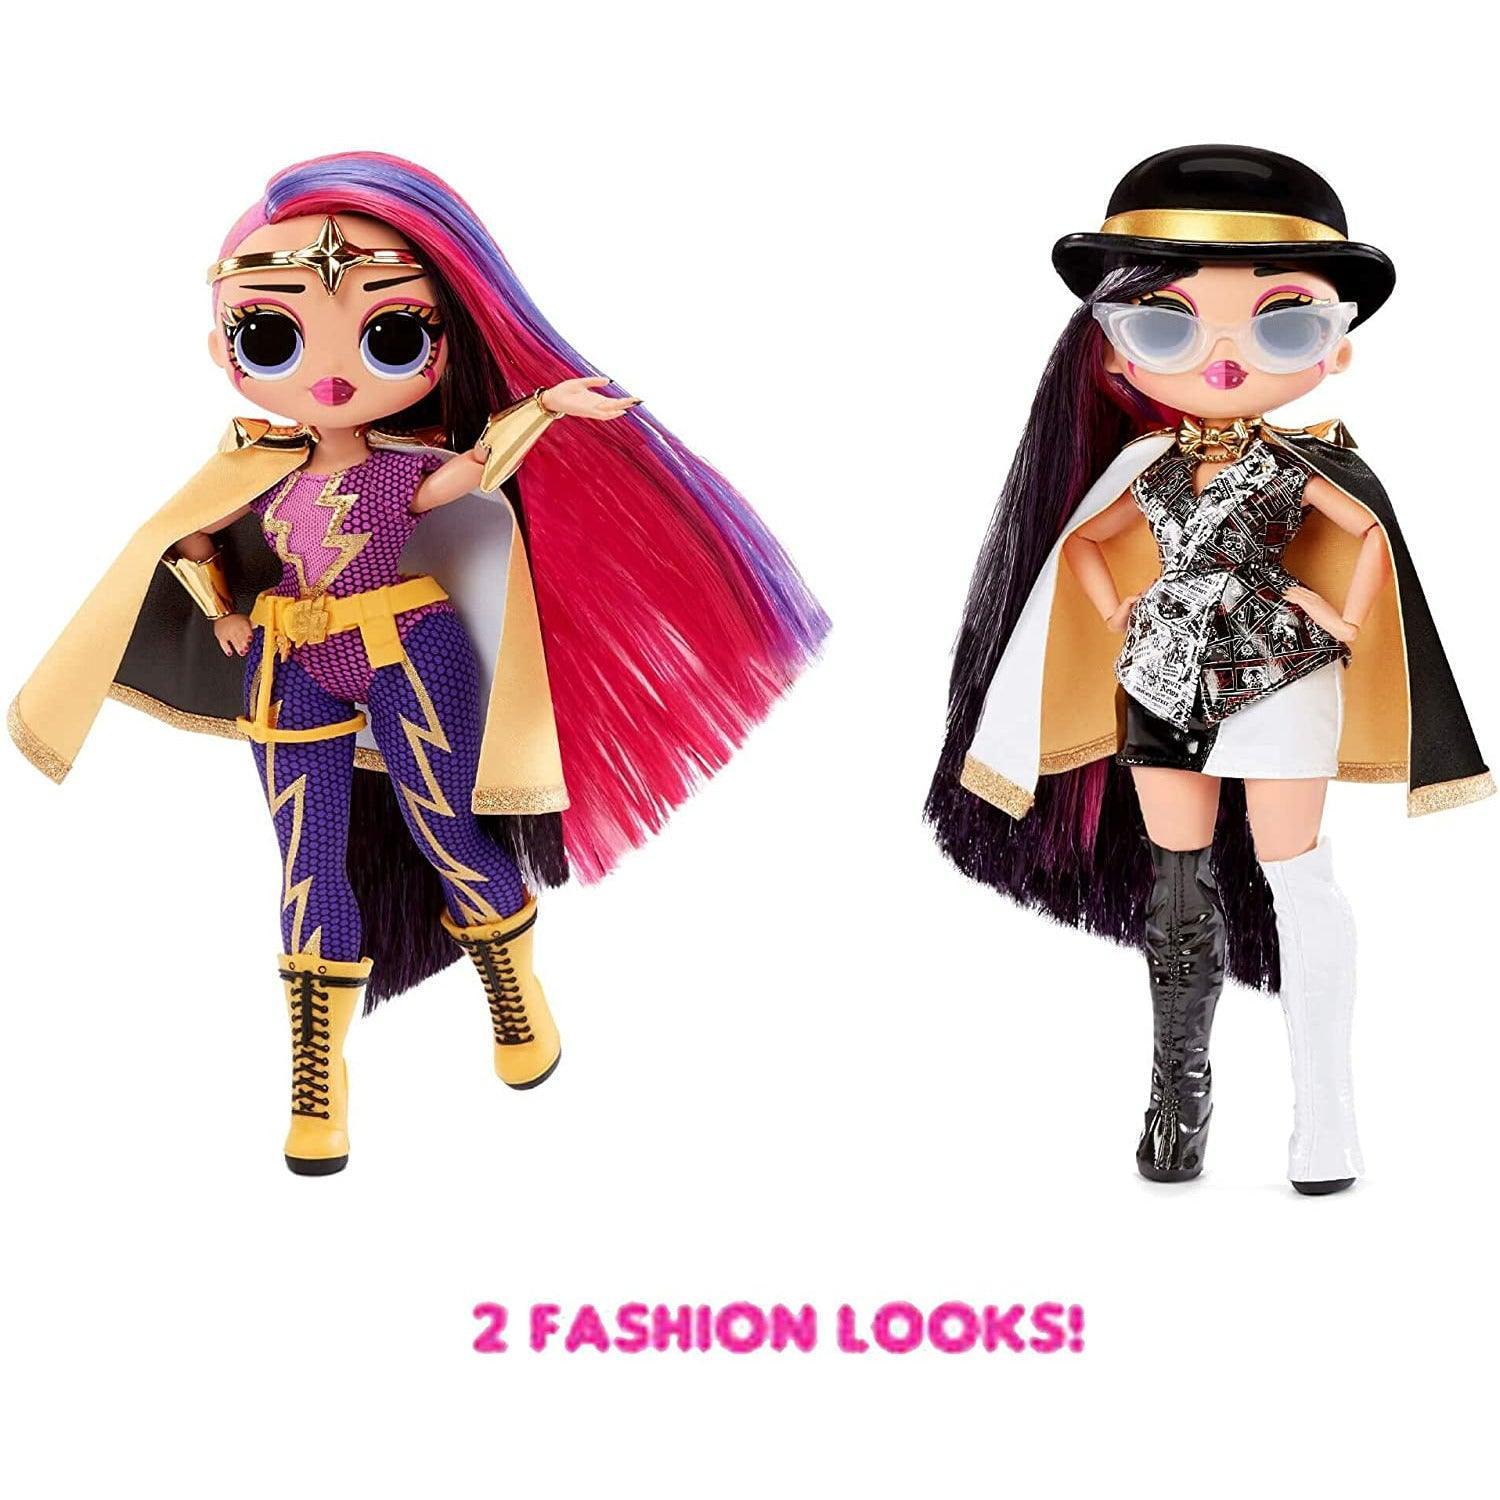 LOL Surprise OMG Movie Magic Ms. Direct Fashion Doll with 25 Surprises Including 2 Outfits, 3D Glasses, Movie Accessories - BumbleToys - 5-7 Years, Dolls, Fashion Dolls & Accessories, Girls, L.O.L